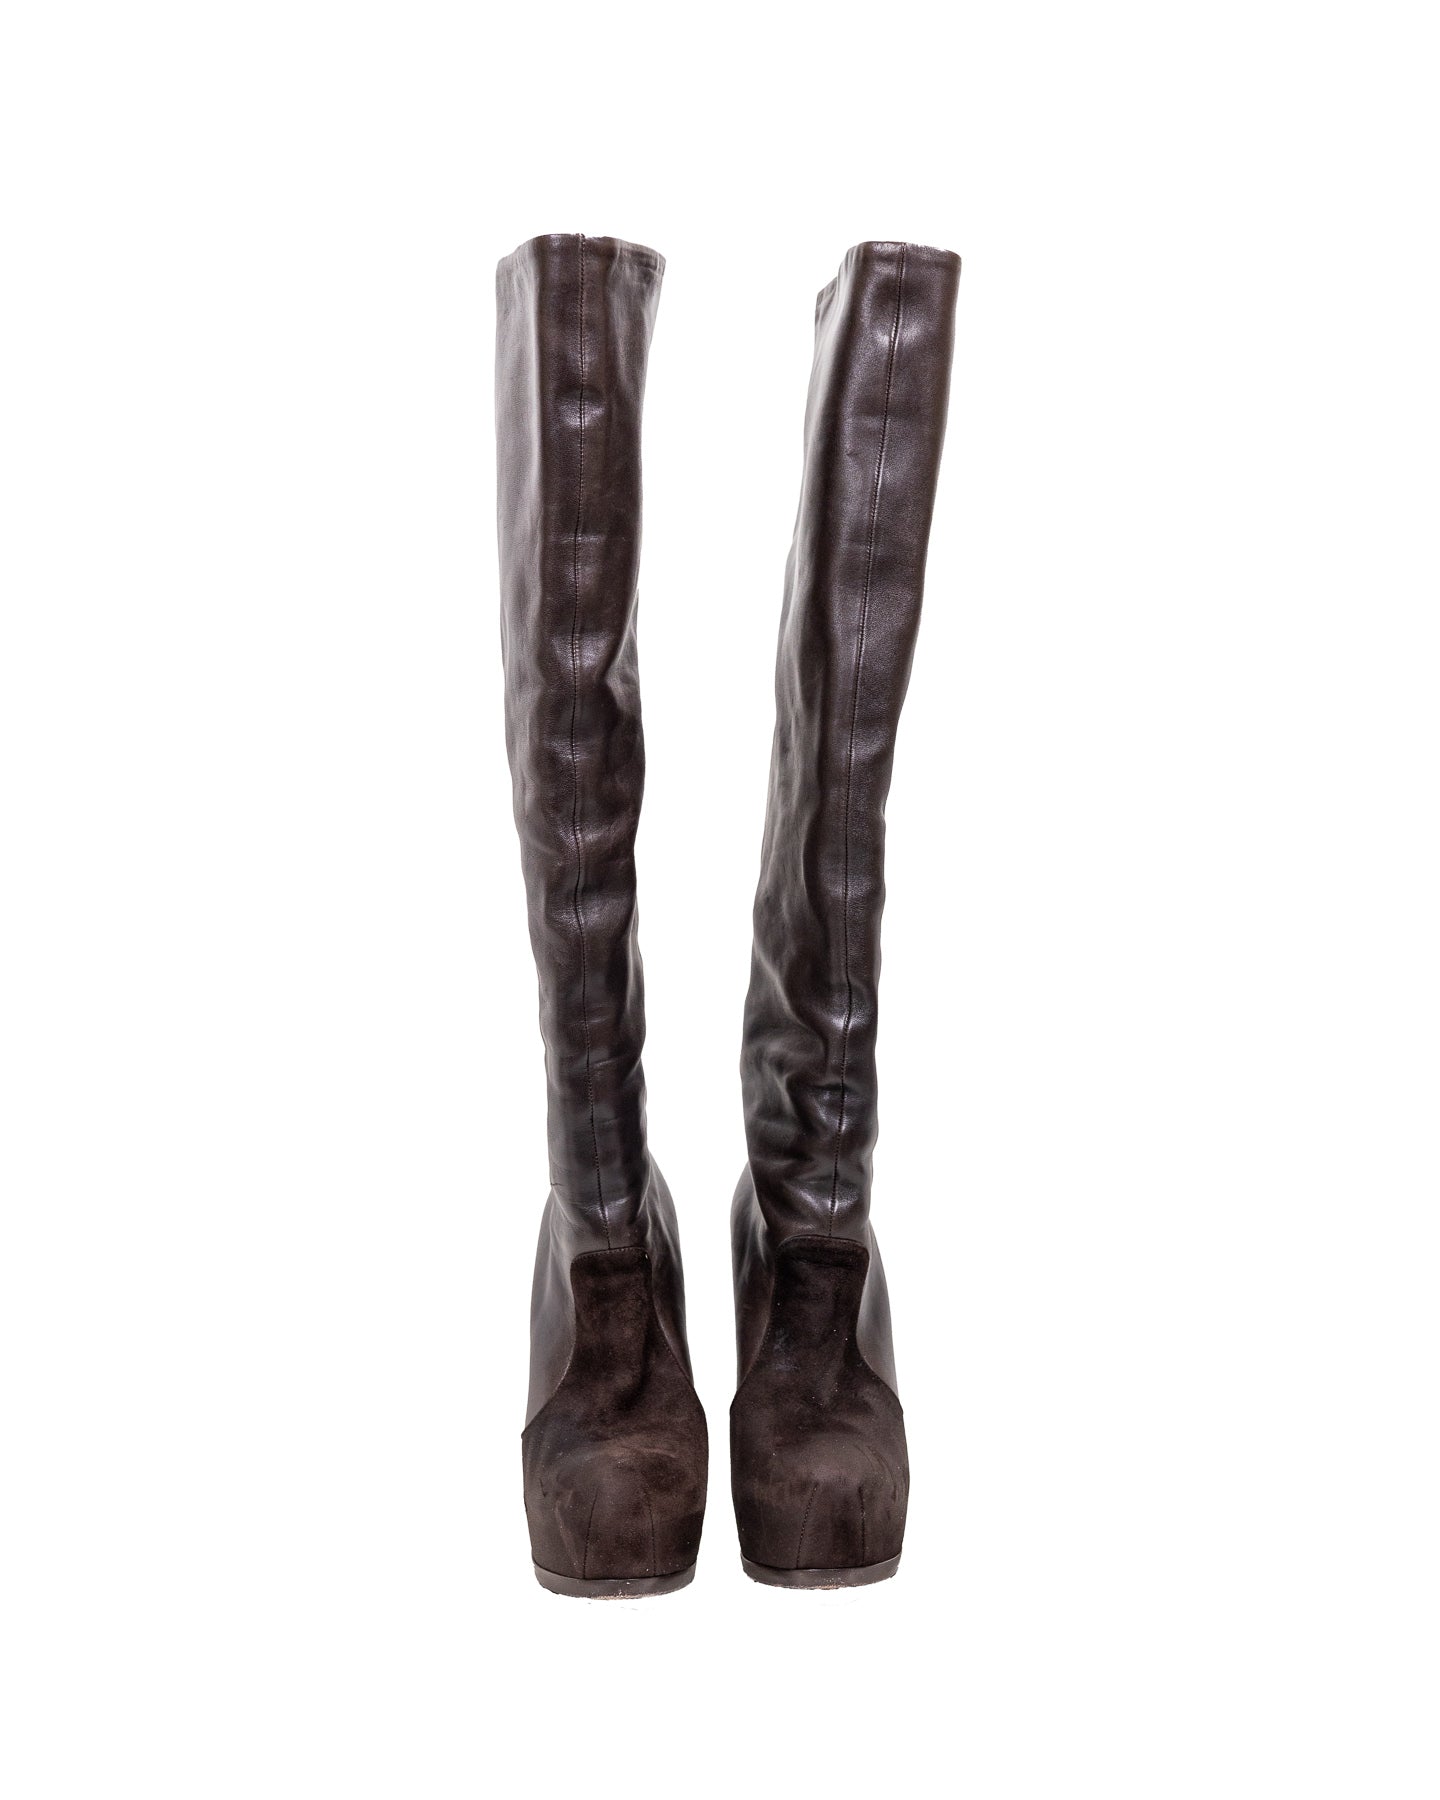 Yves Saint Laurent Knee Hight Heel Leather Boots - Size 38 With Box